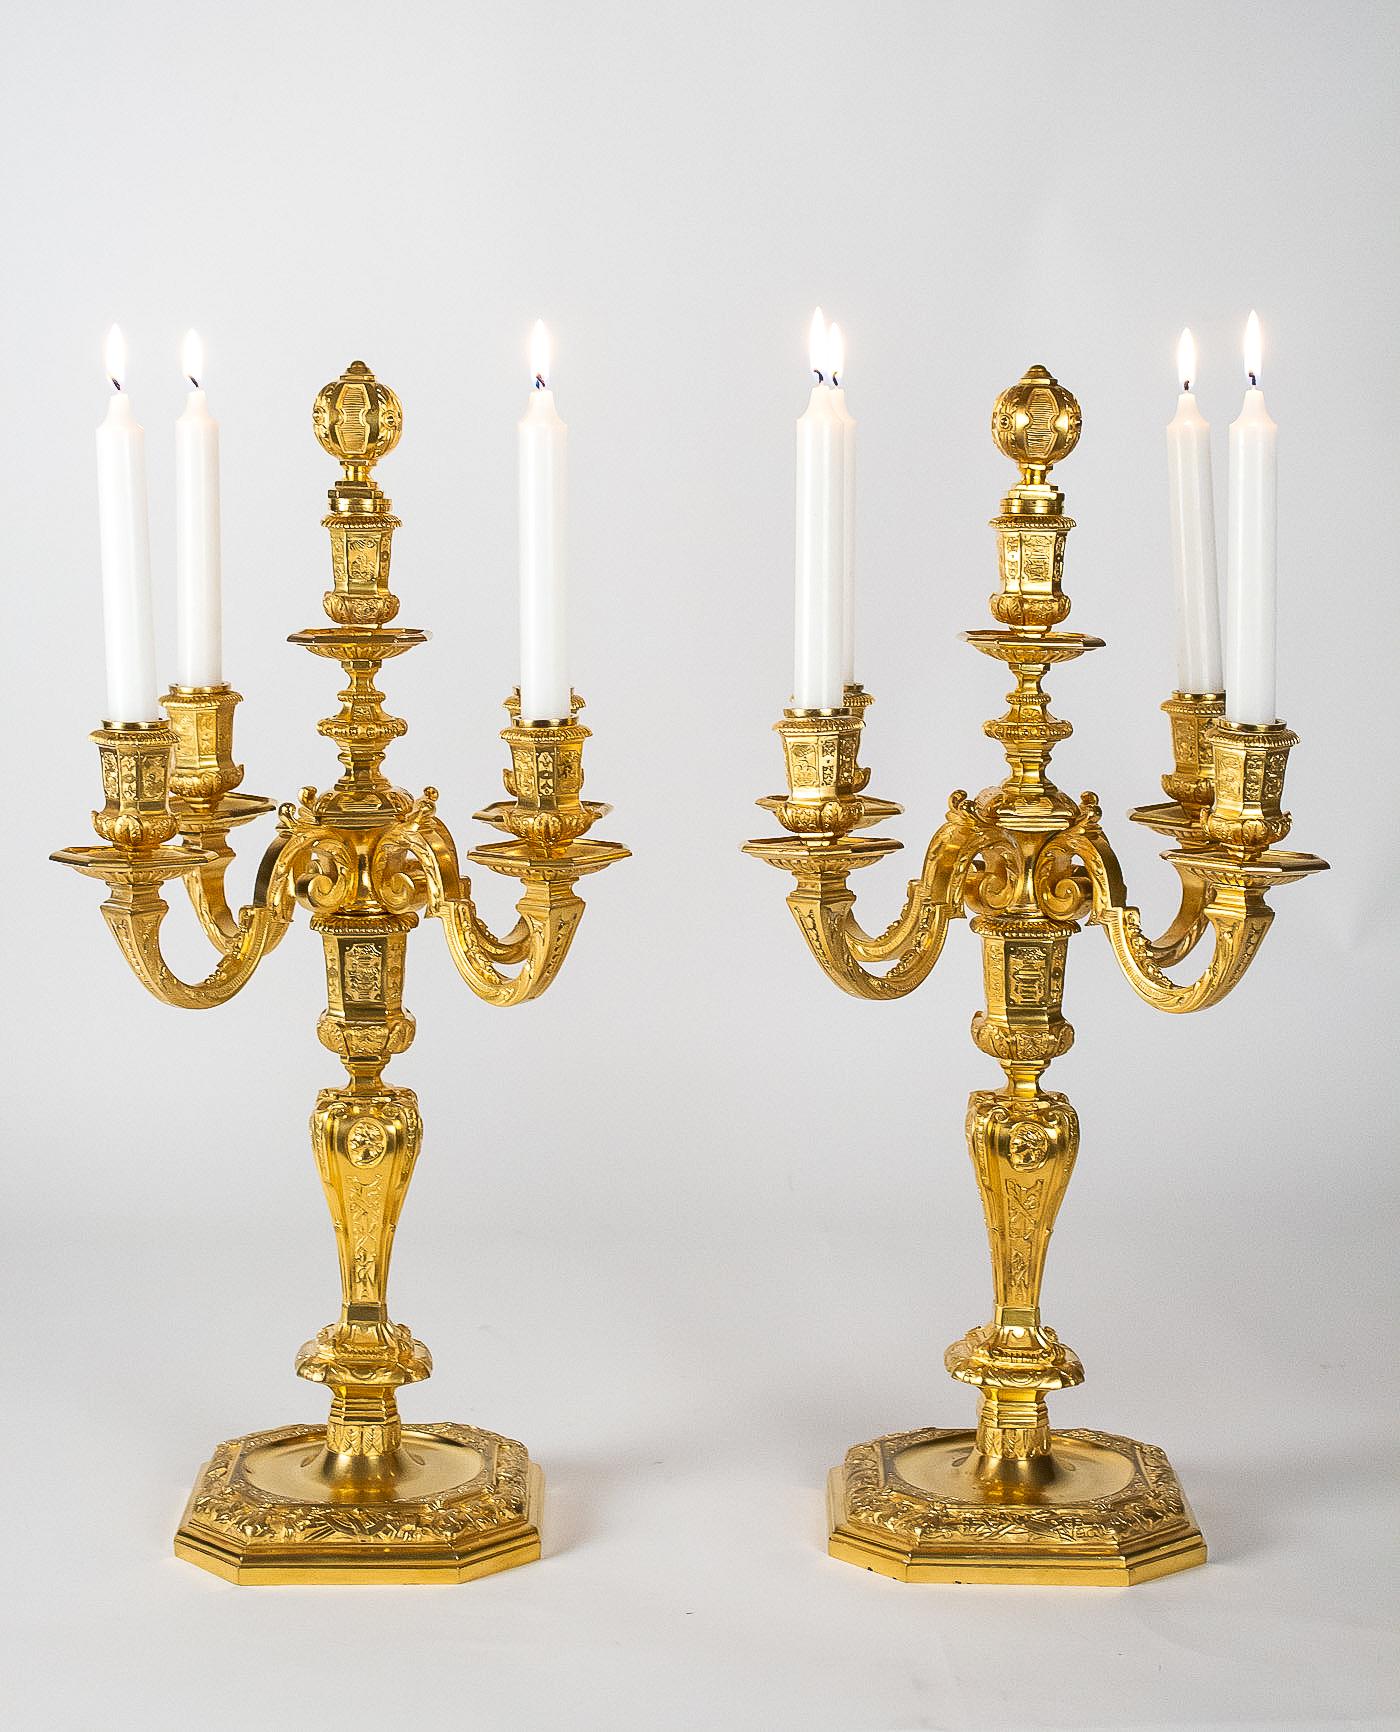 by H Voisenet, Large Pair of Louis XIV Style Ormolu Candelabras, circa 1880-1900 12